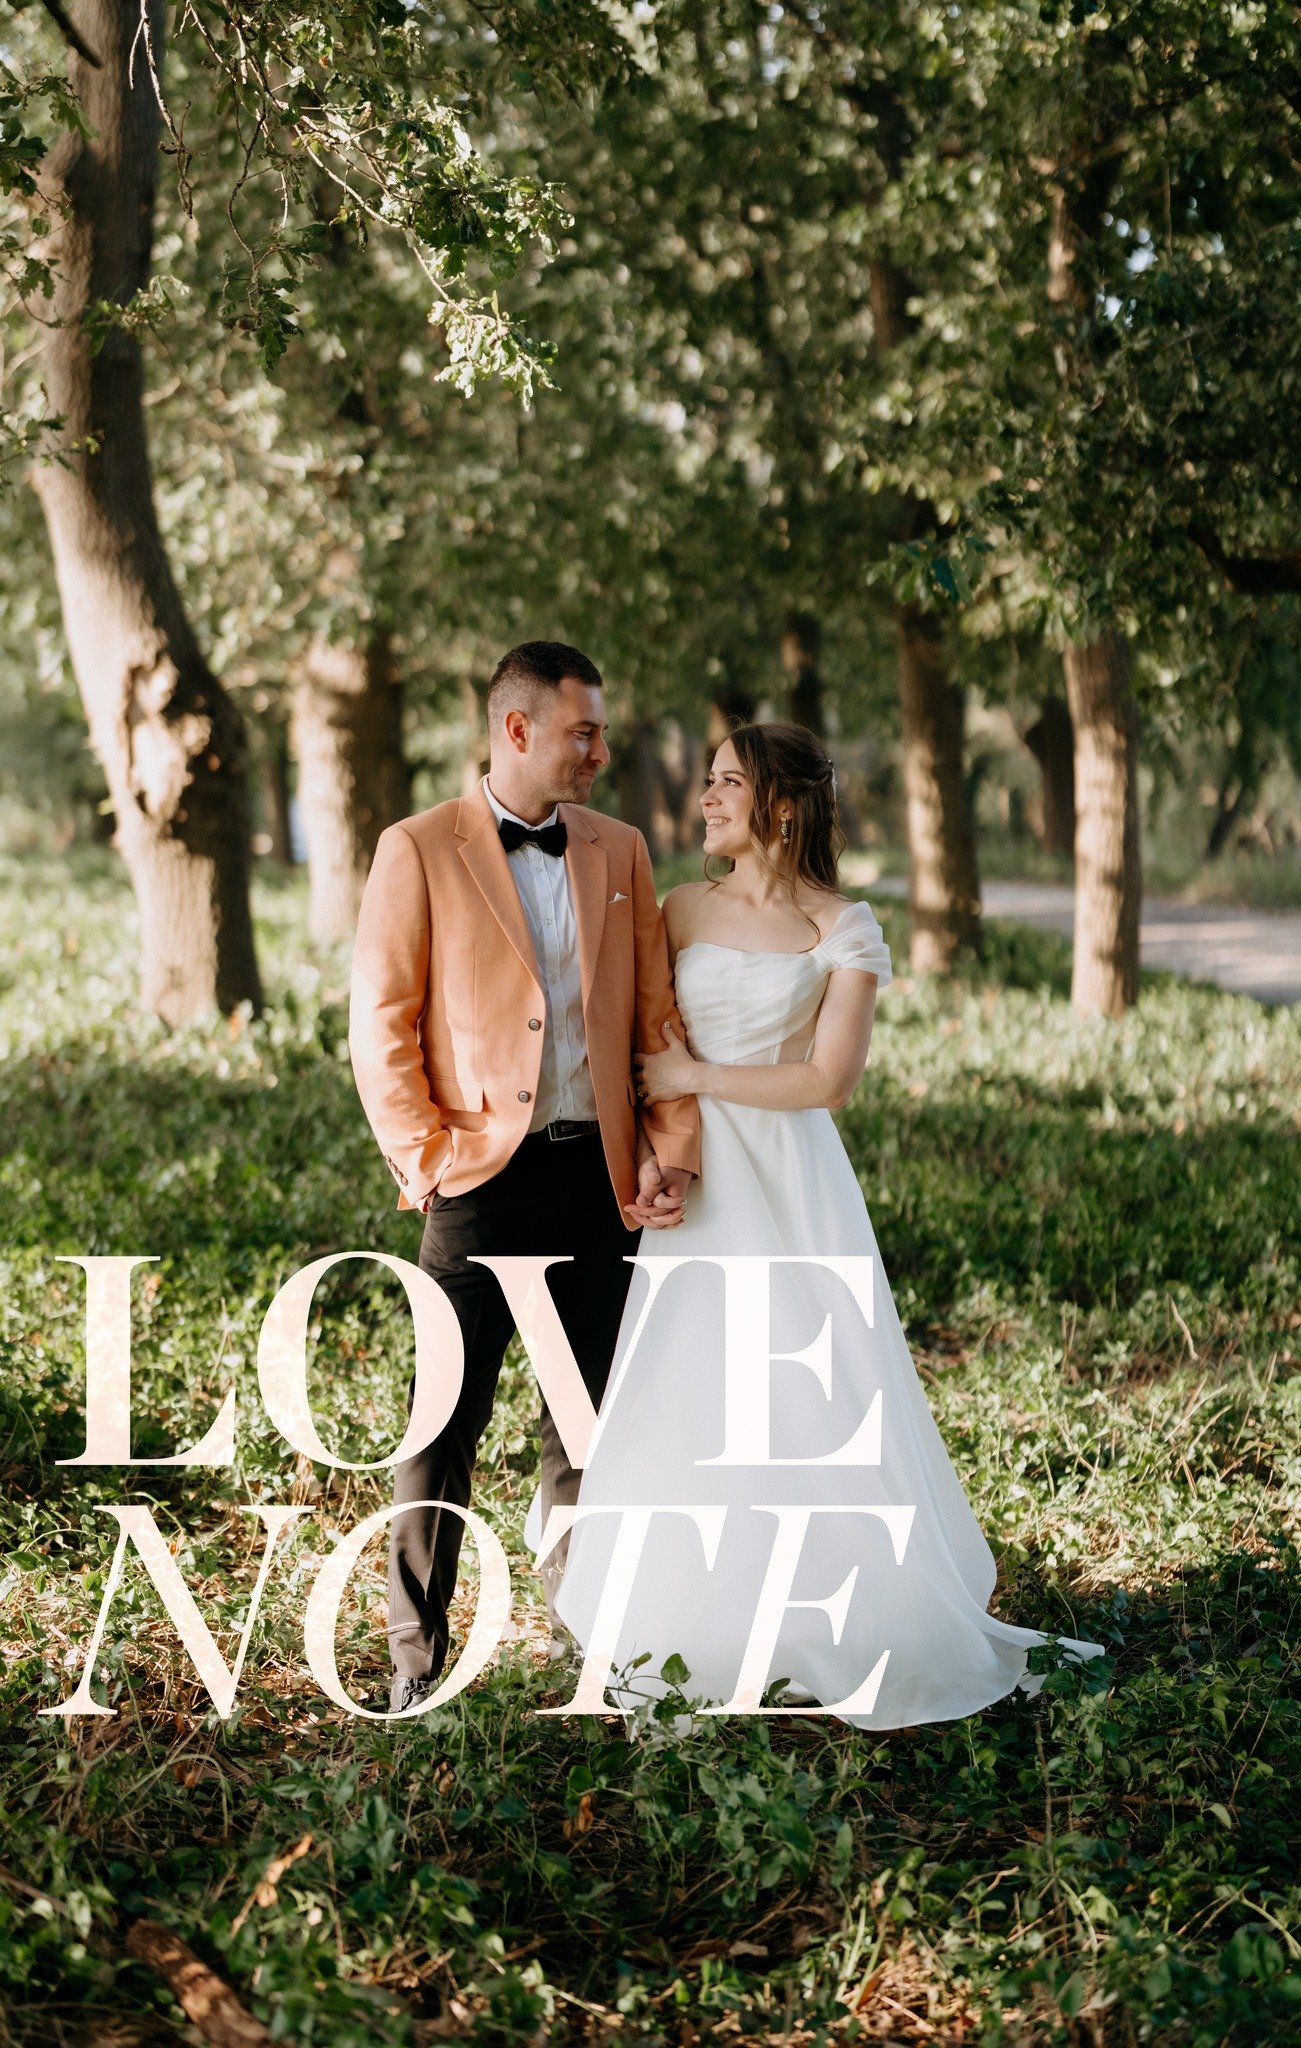 &ldquo;Hi Julia and Adam,

Wanted to say a HUGE thank you for everything you did for our wedding day! We had the absolute best day on Friday - you had literally thought of everything which made our lives (and our stress levels) so much more manageabl